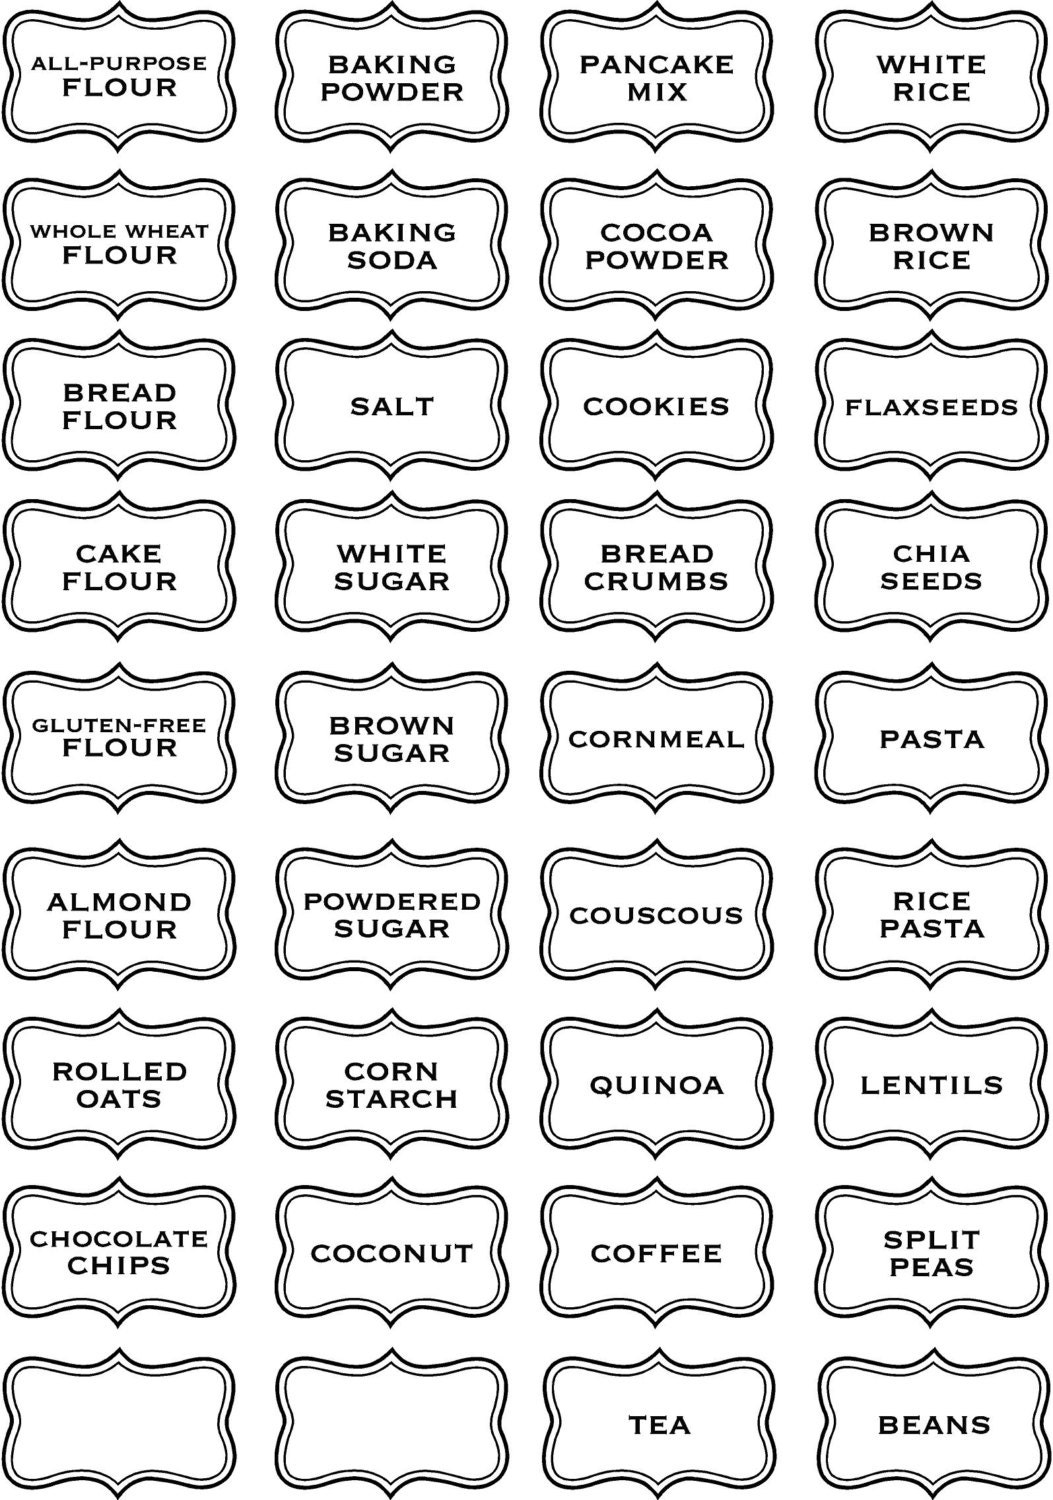 jar-labels-tags-5x3-to-help-organize-your-pantry